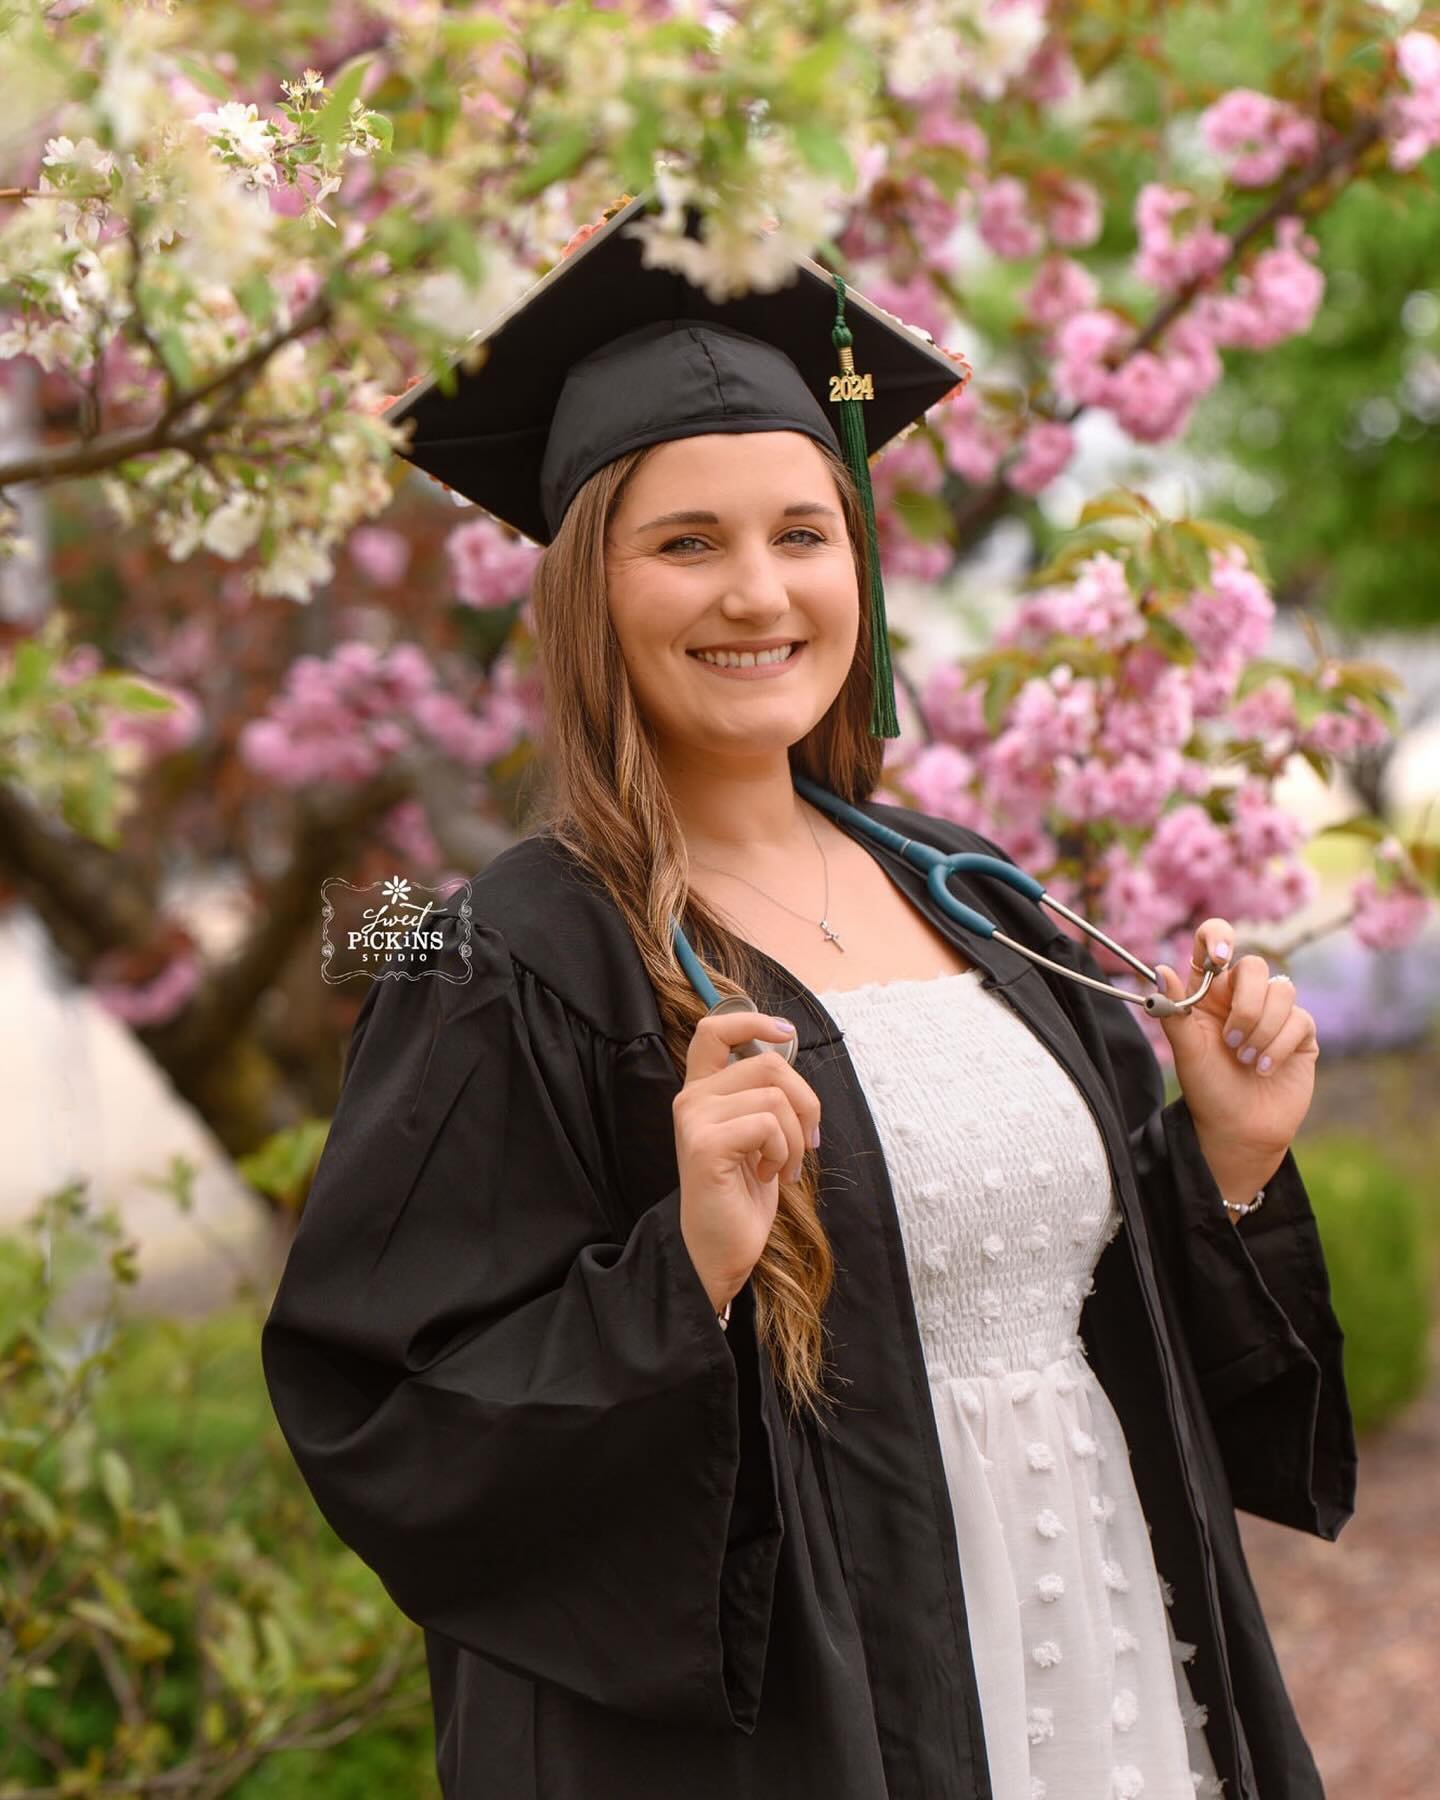 Congratulations, Ivy Tech Nursing #grad, TAYLOR! 🎉 Wishing you a bright future!

Spring put on a beautiful show for this sweet girl 🌸 I&rsquo;ve been dodging rain storms all season but Taylor was such a fresh breath of air! I love celebrating these